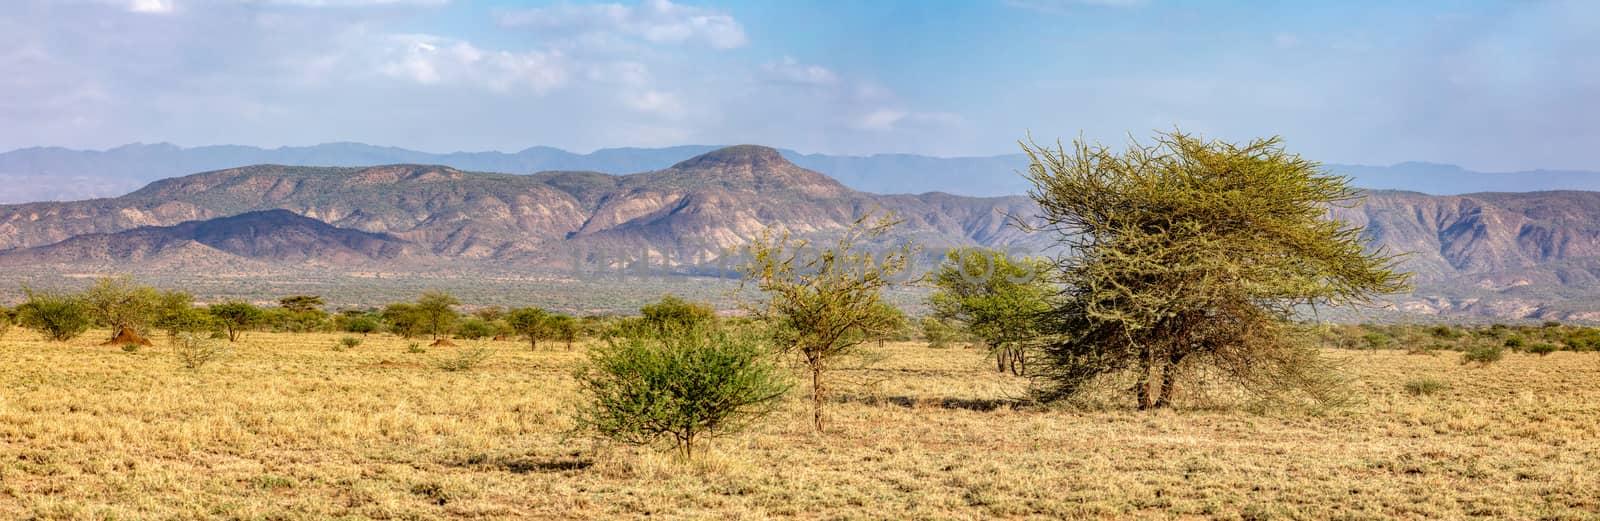 Panorama of Awash national park landscape with acacia tree in front and mountain in background